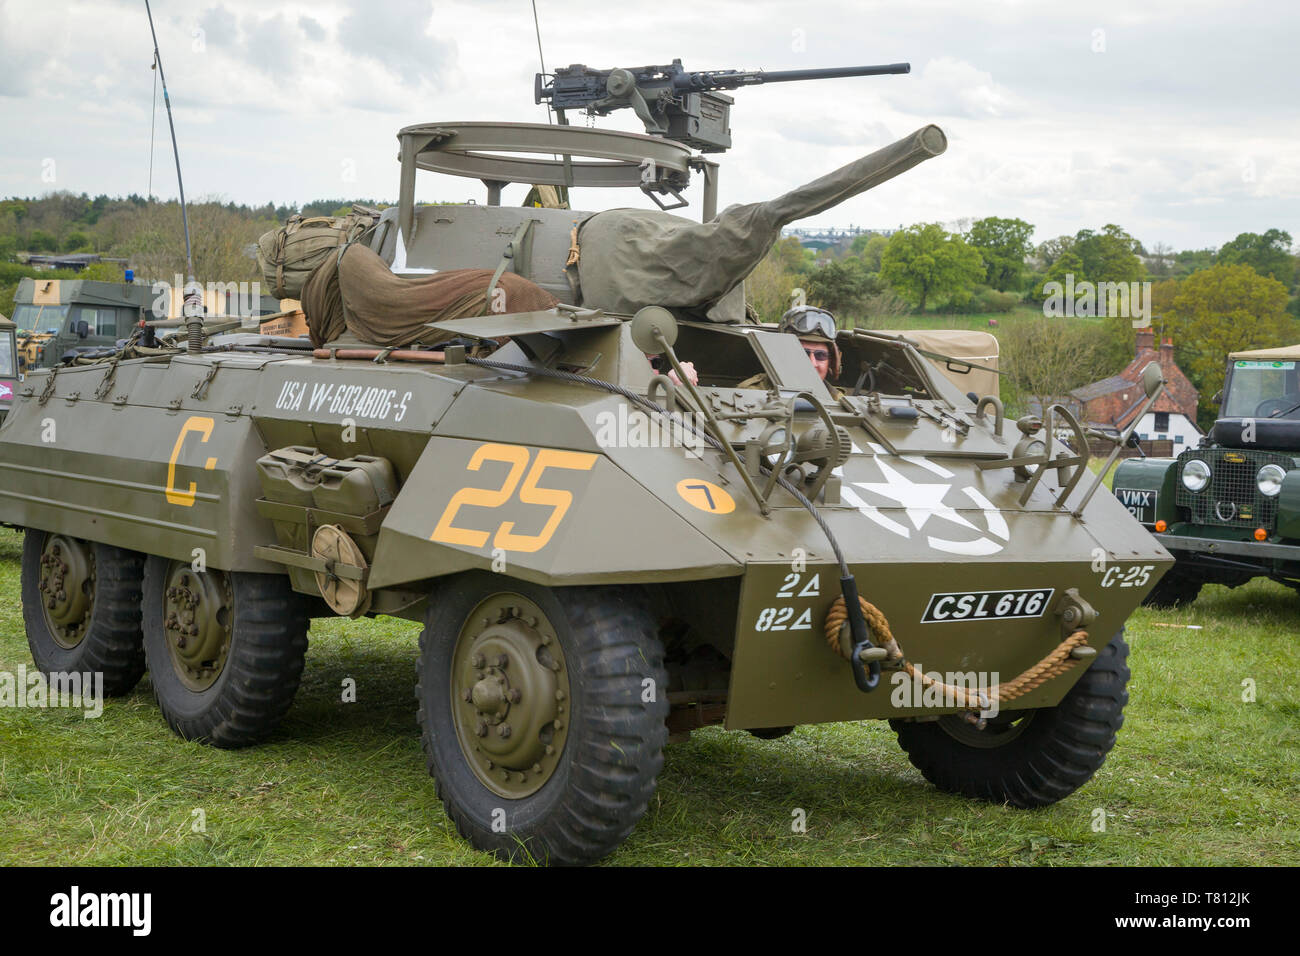 A fully restored WW2 American Military M8 Greyhound Scout Car at a classic car show. Stock Photo